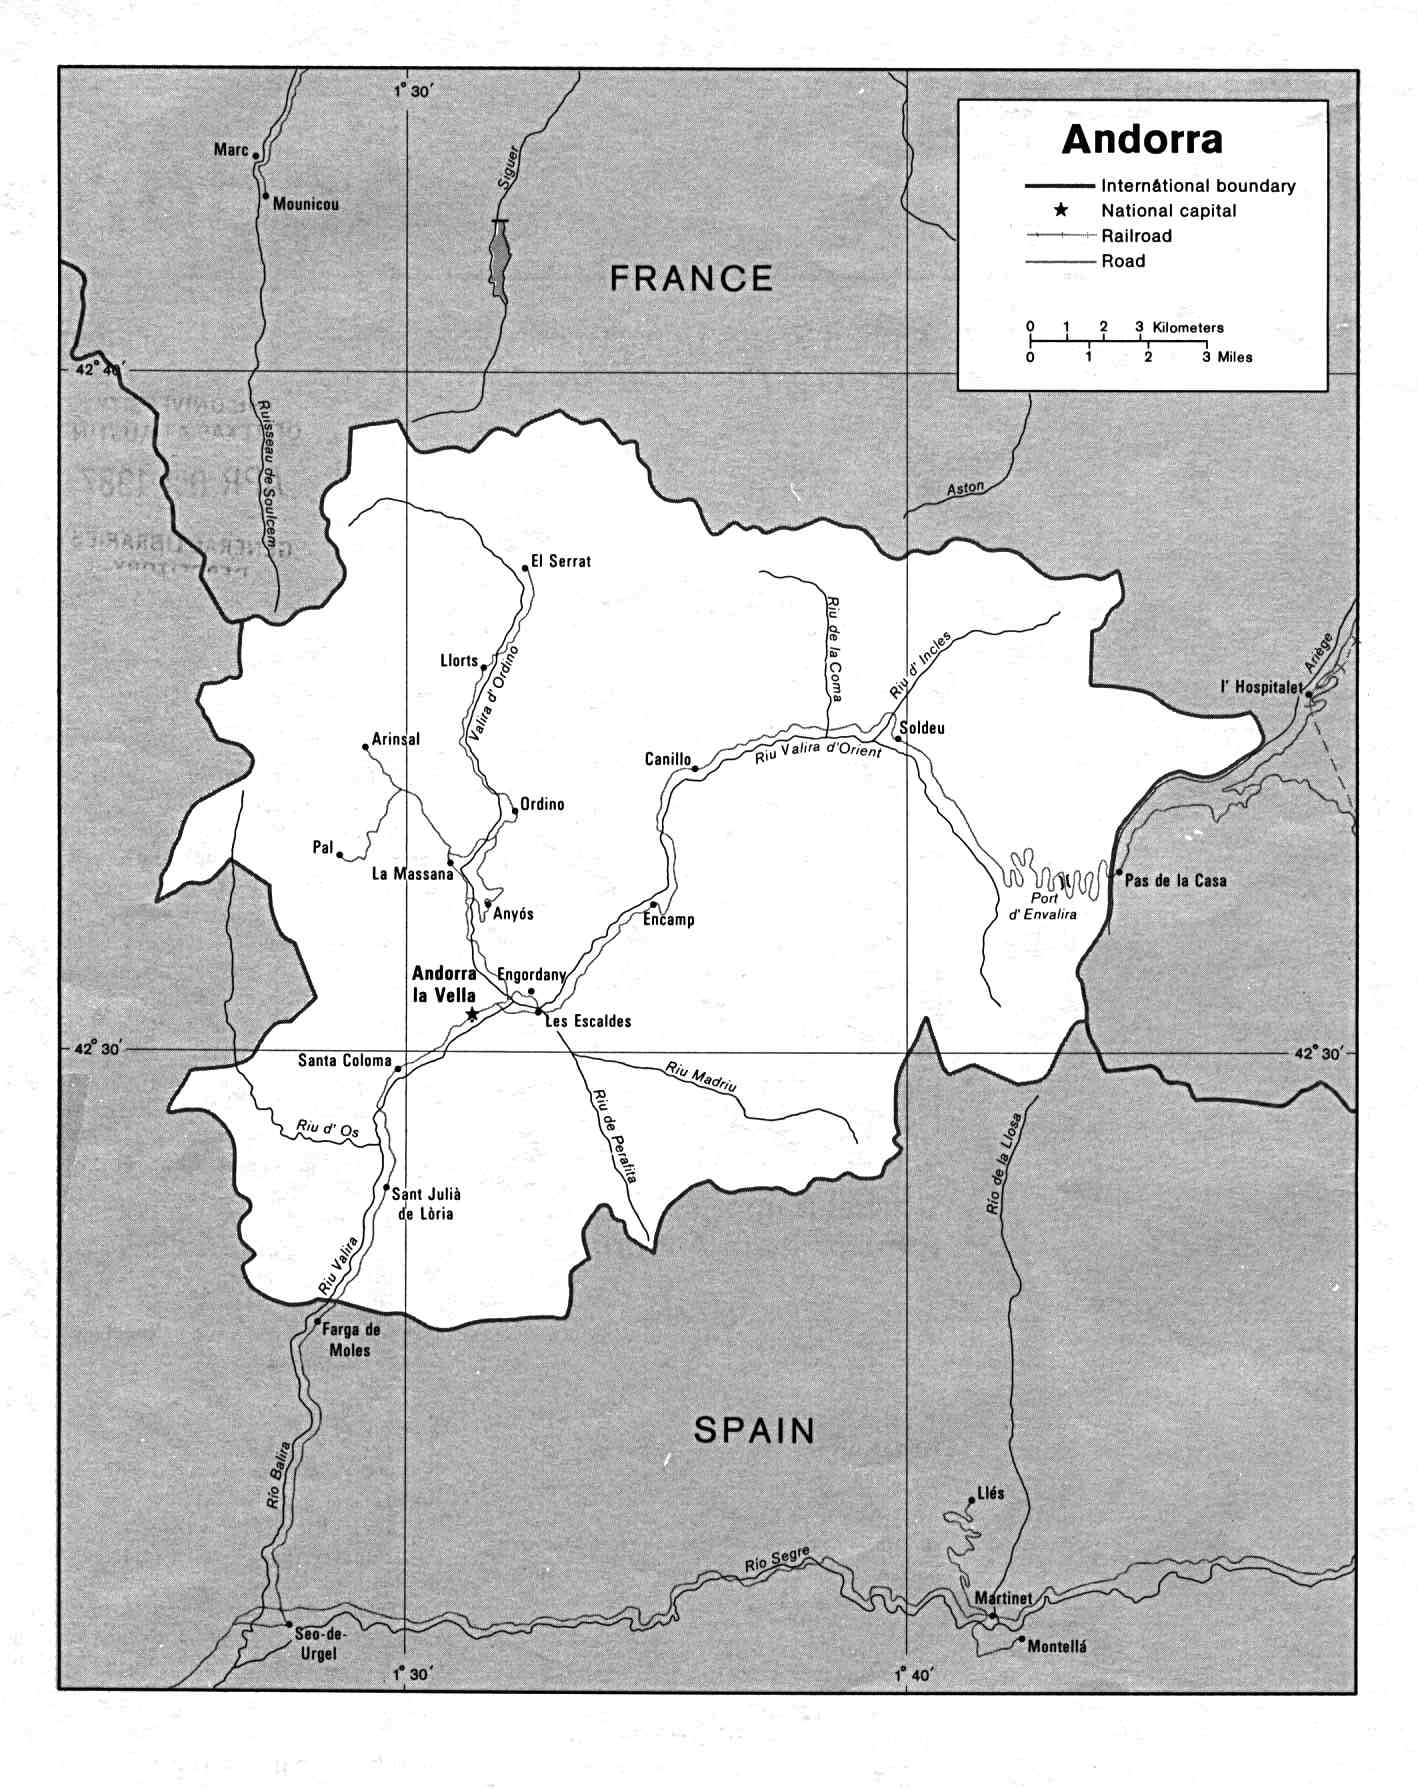 Map Of Andorra. Andorra [Political Map] U.S. Department of State 1986 (174K)